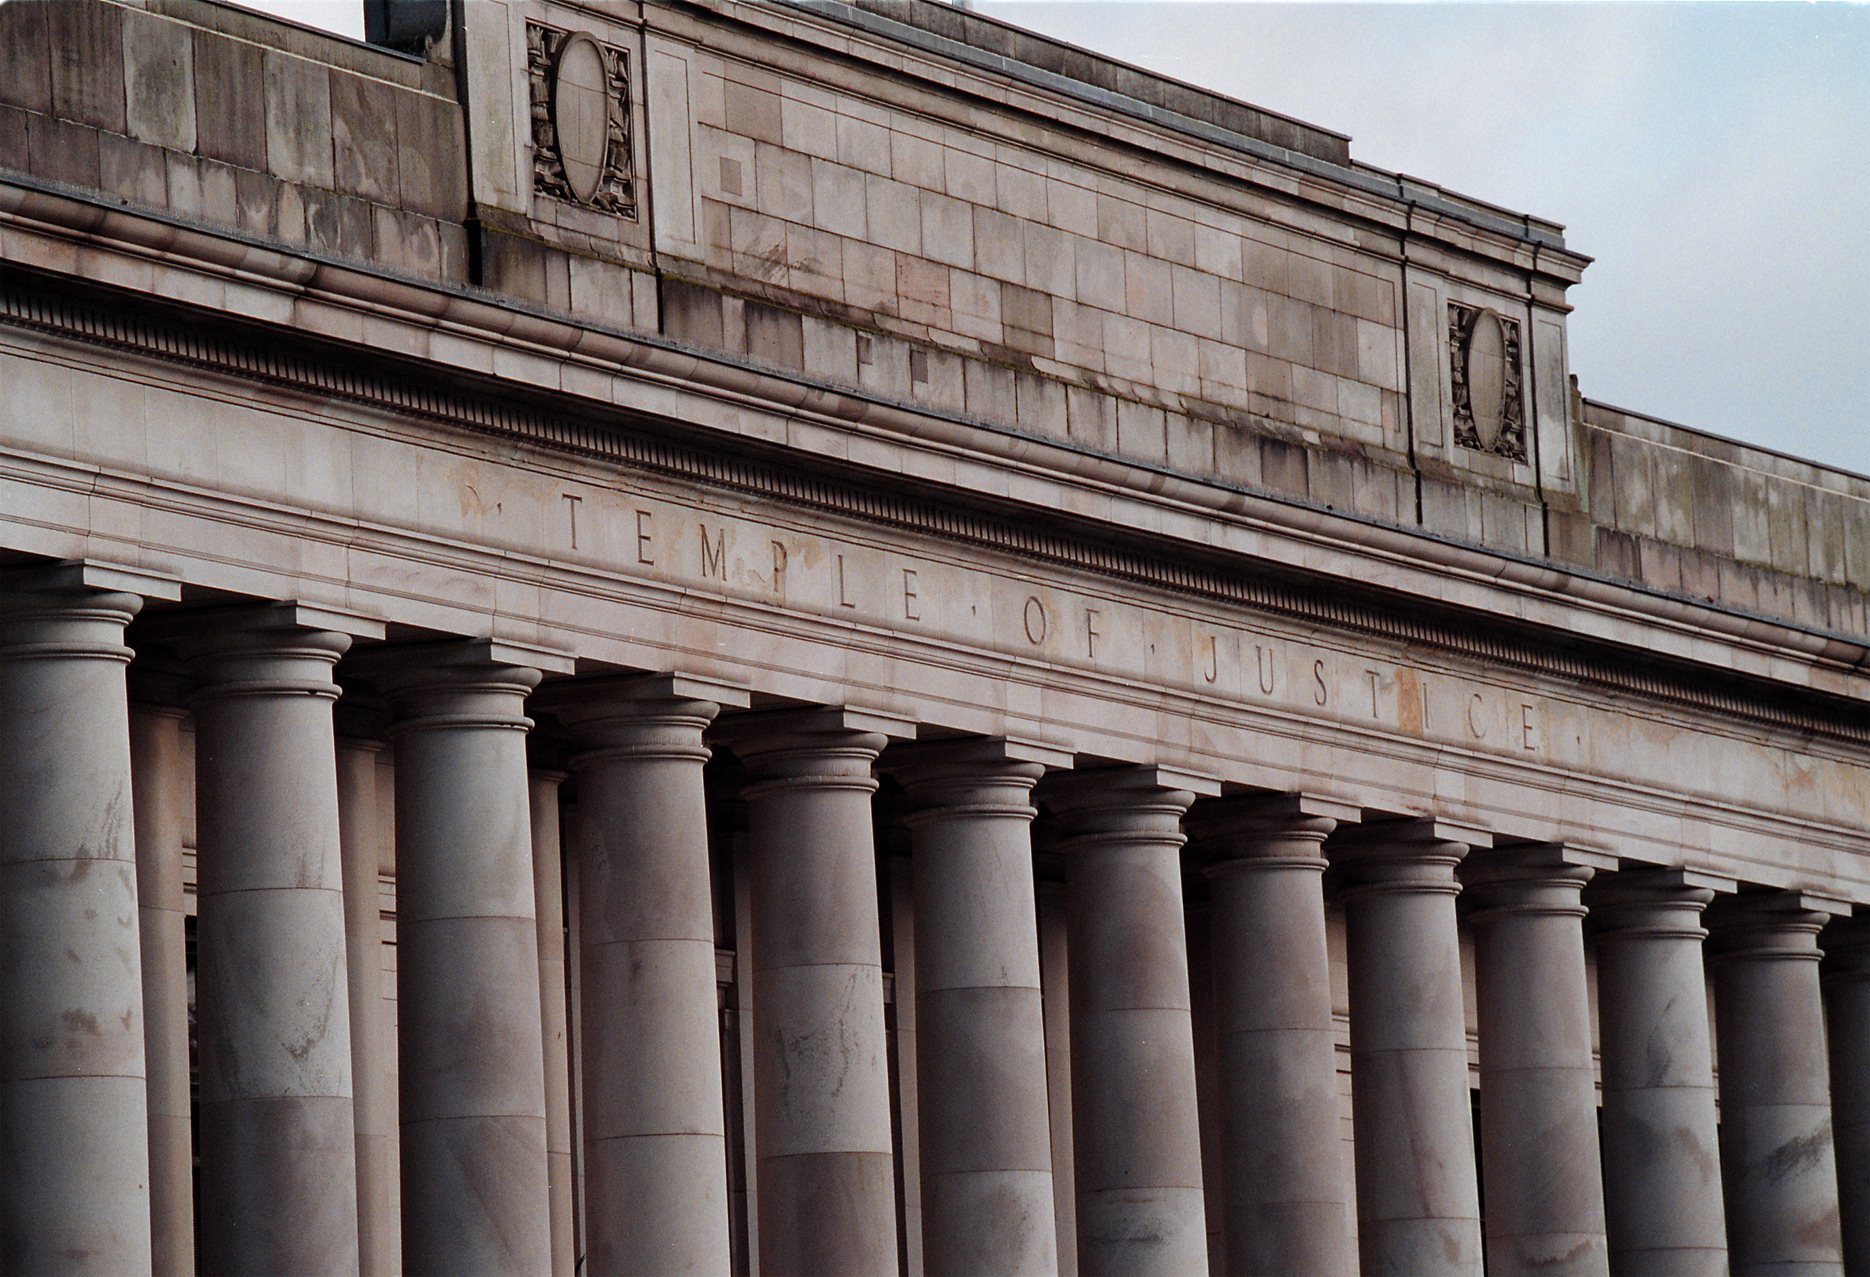 The Doric columns of the Temple of Justice, which contains the chambers and offices of the State Supreme Court.